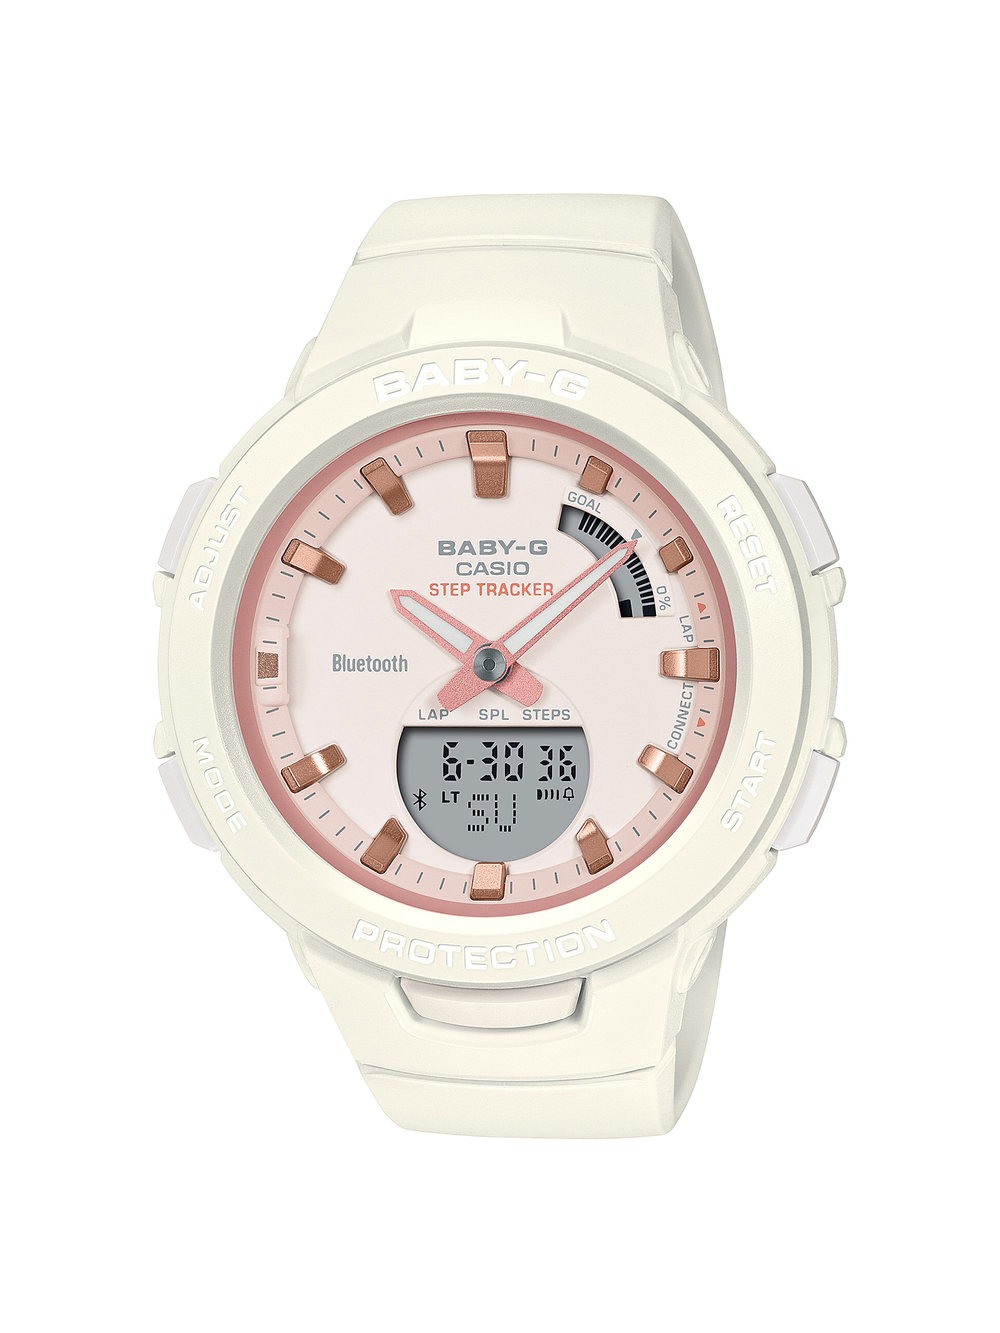 G-shock Baby-g Watch in White Pascoes